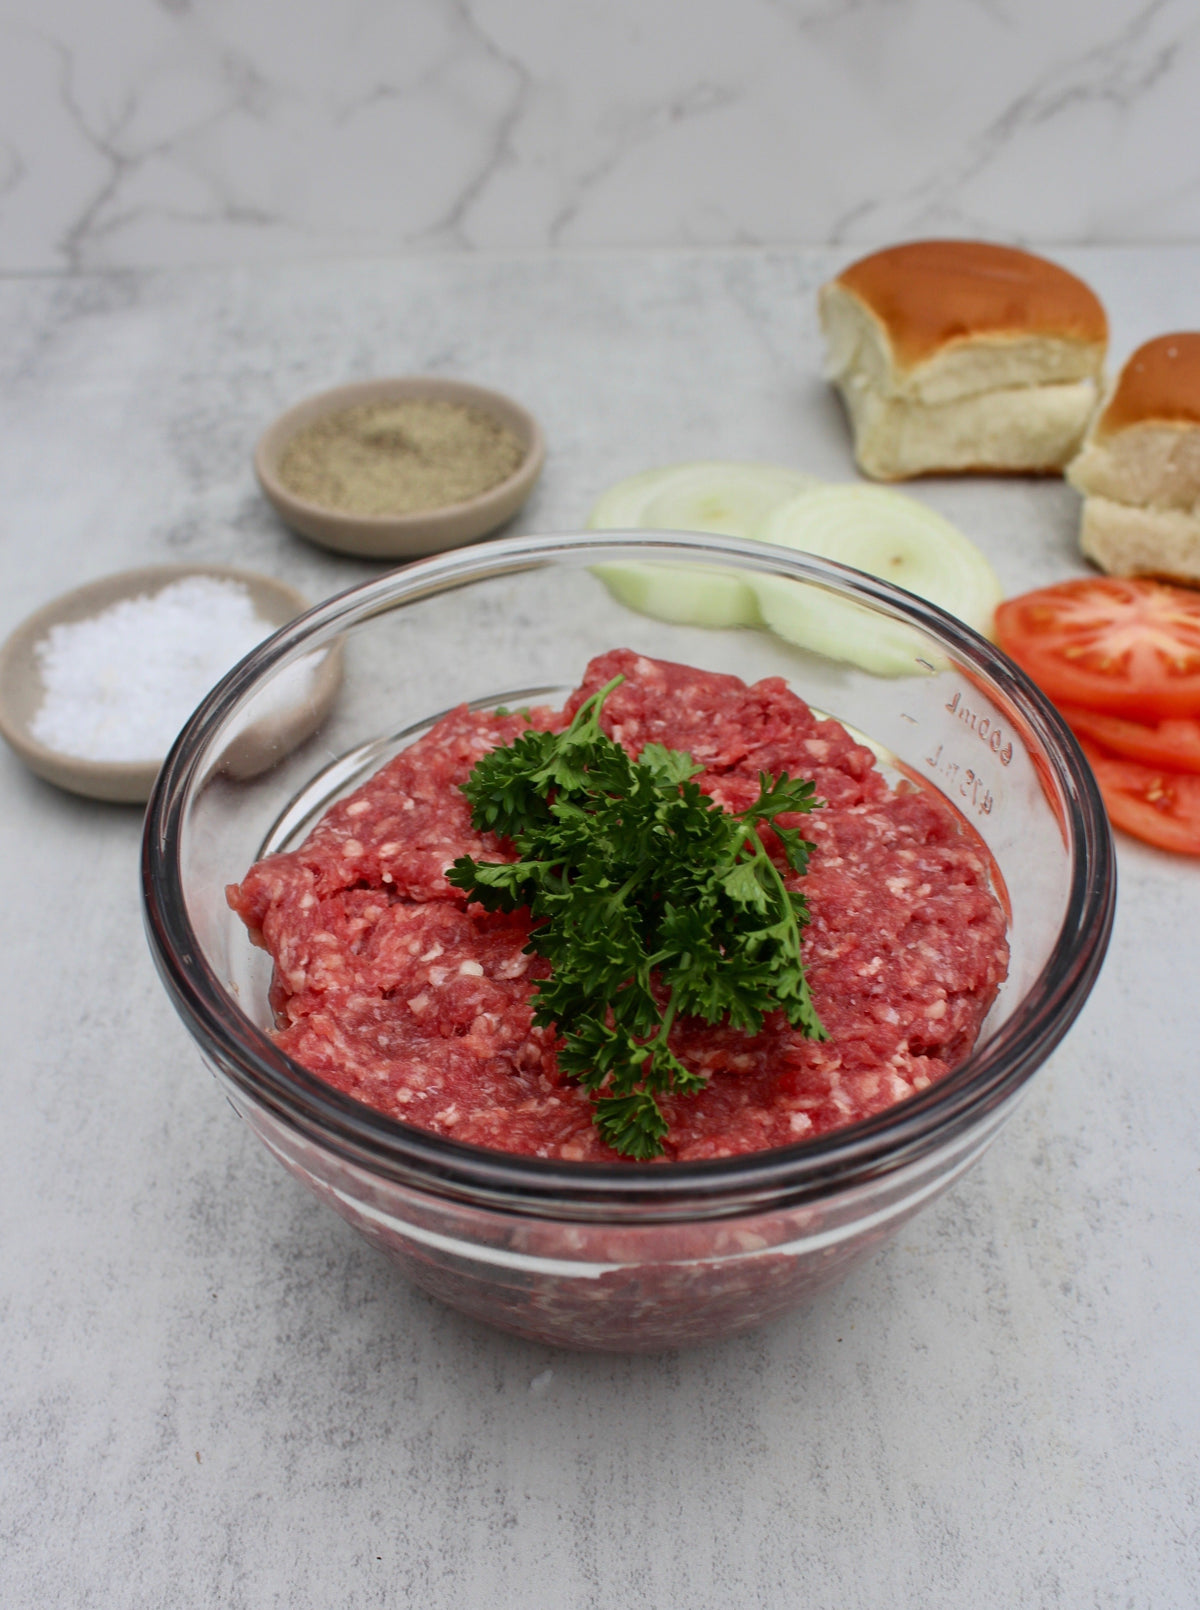 Pastured Beef, Prime Ground Beef with Parsley